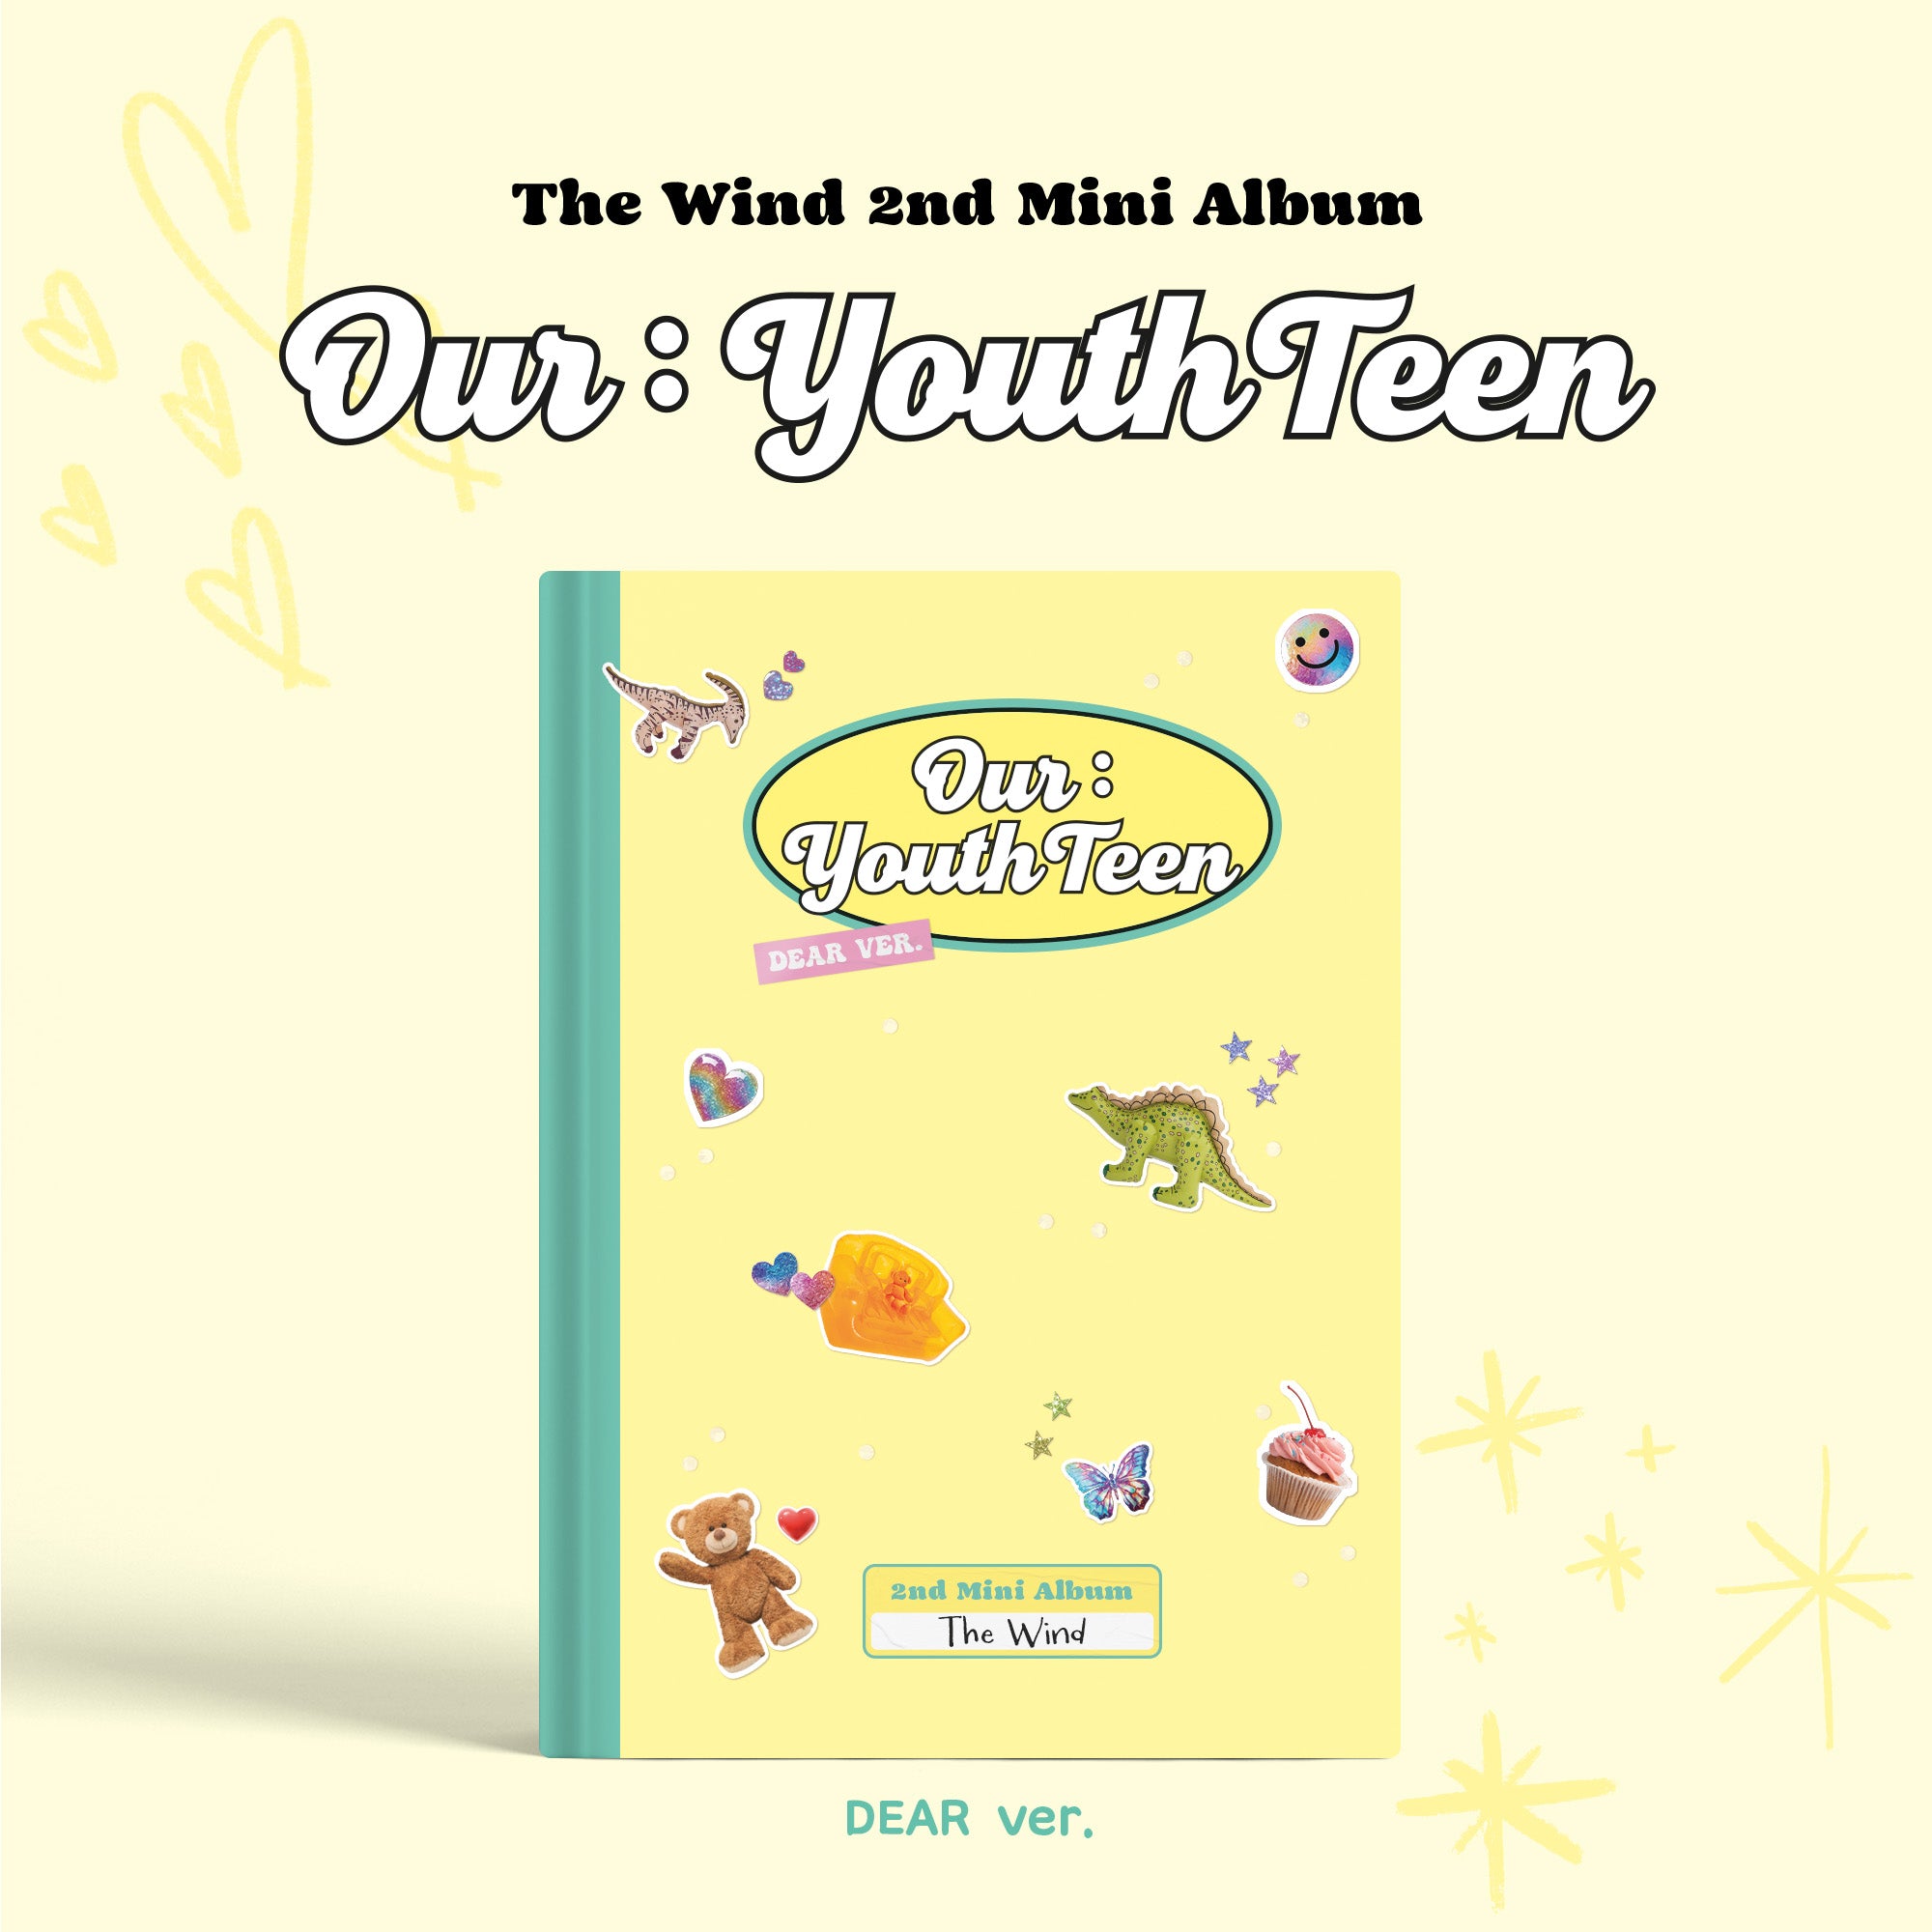 The Wind - 2nd Mini Album Our : YouthTeen